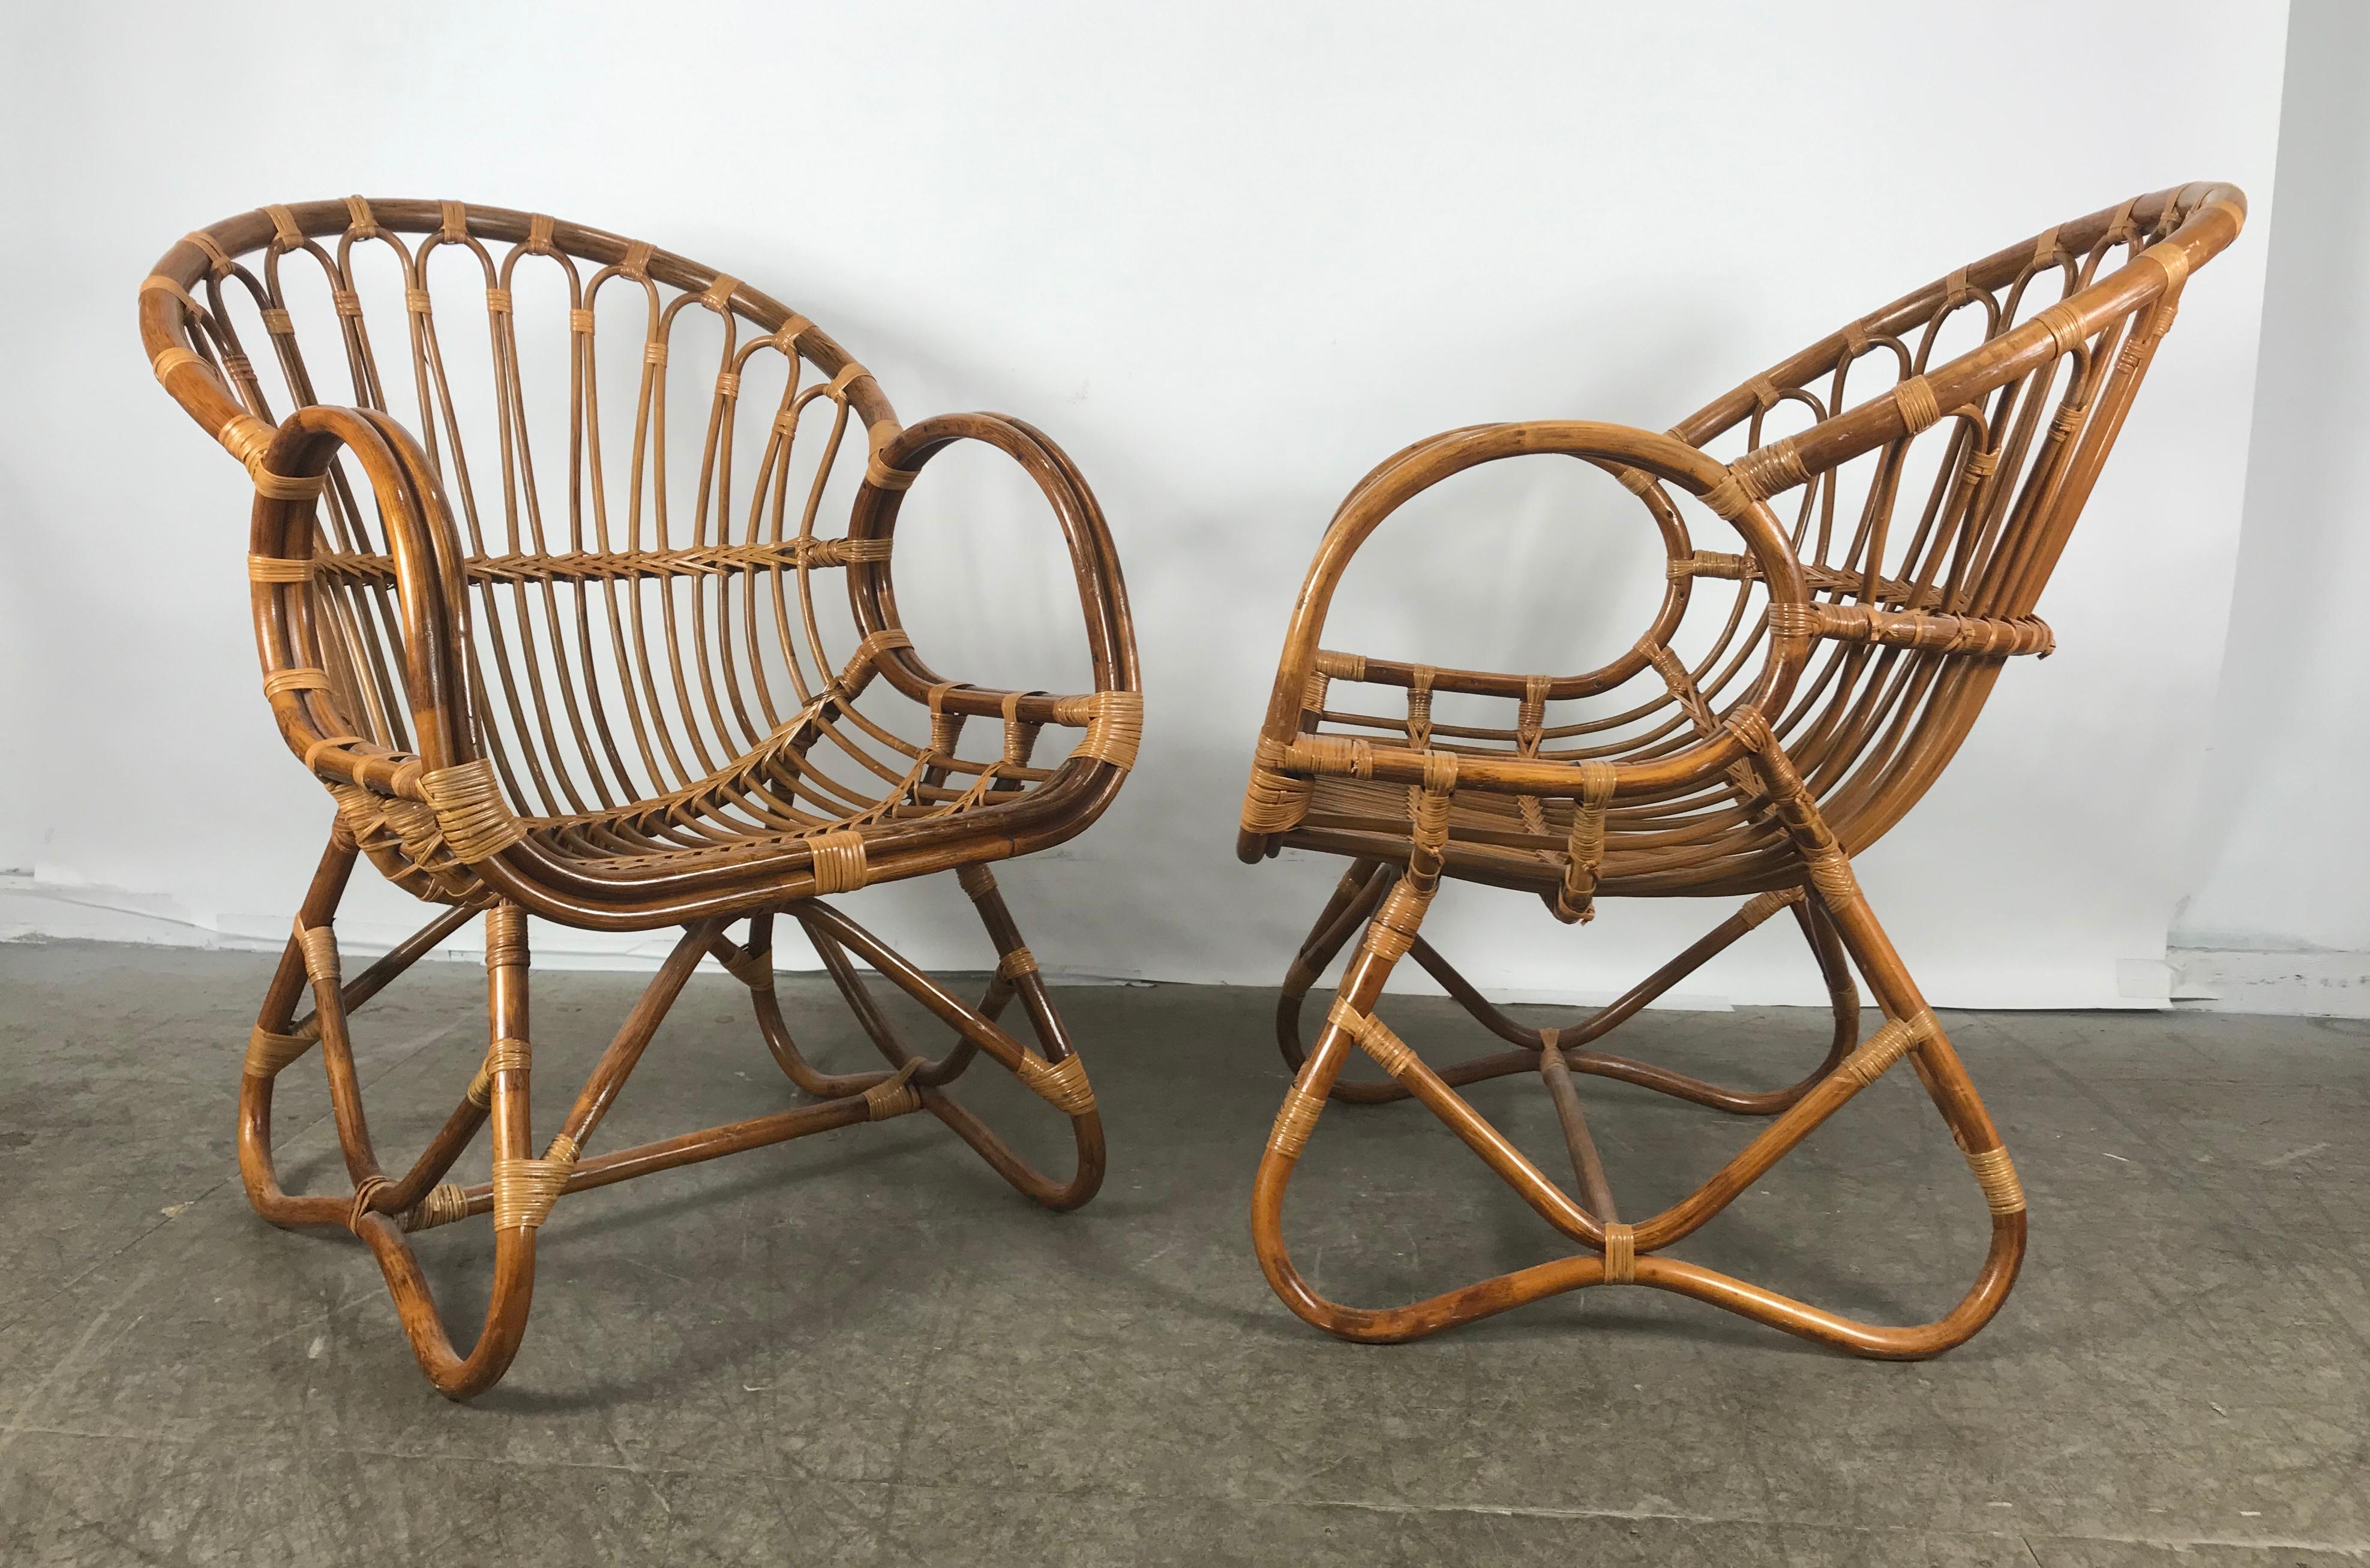 Pair of Mid-Century Modern style of Franco Albini bamboo or rattan lounge chairs. Classic Mid-Century Modern design.